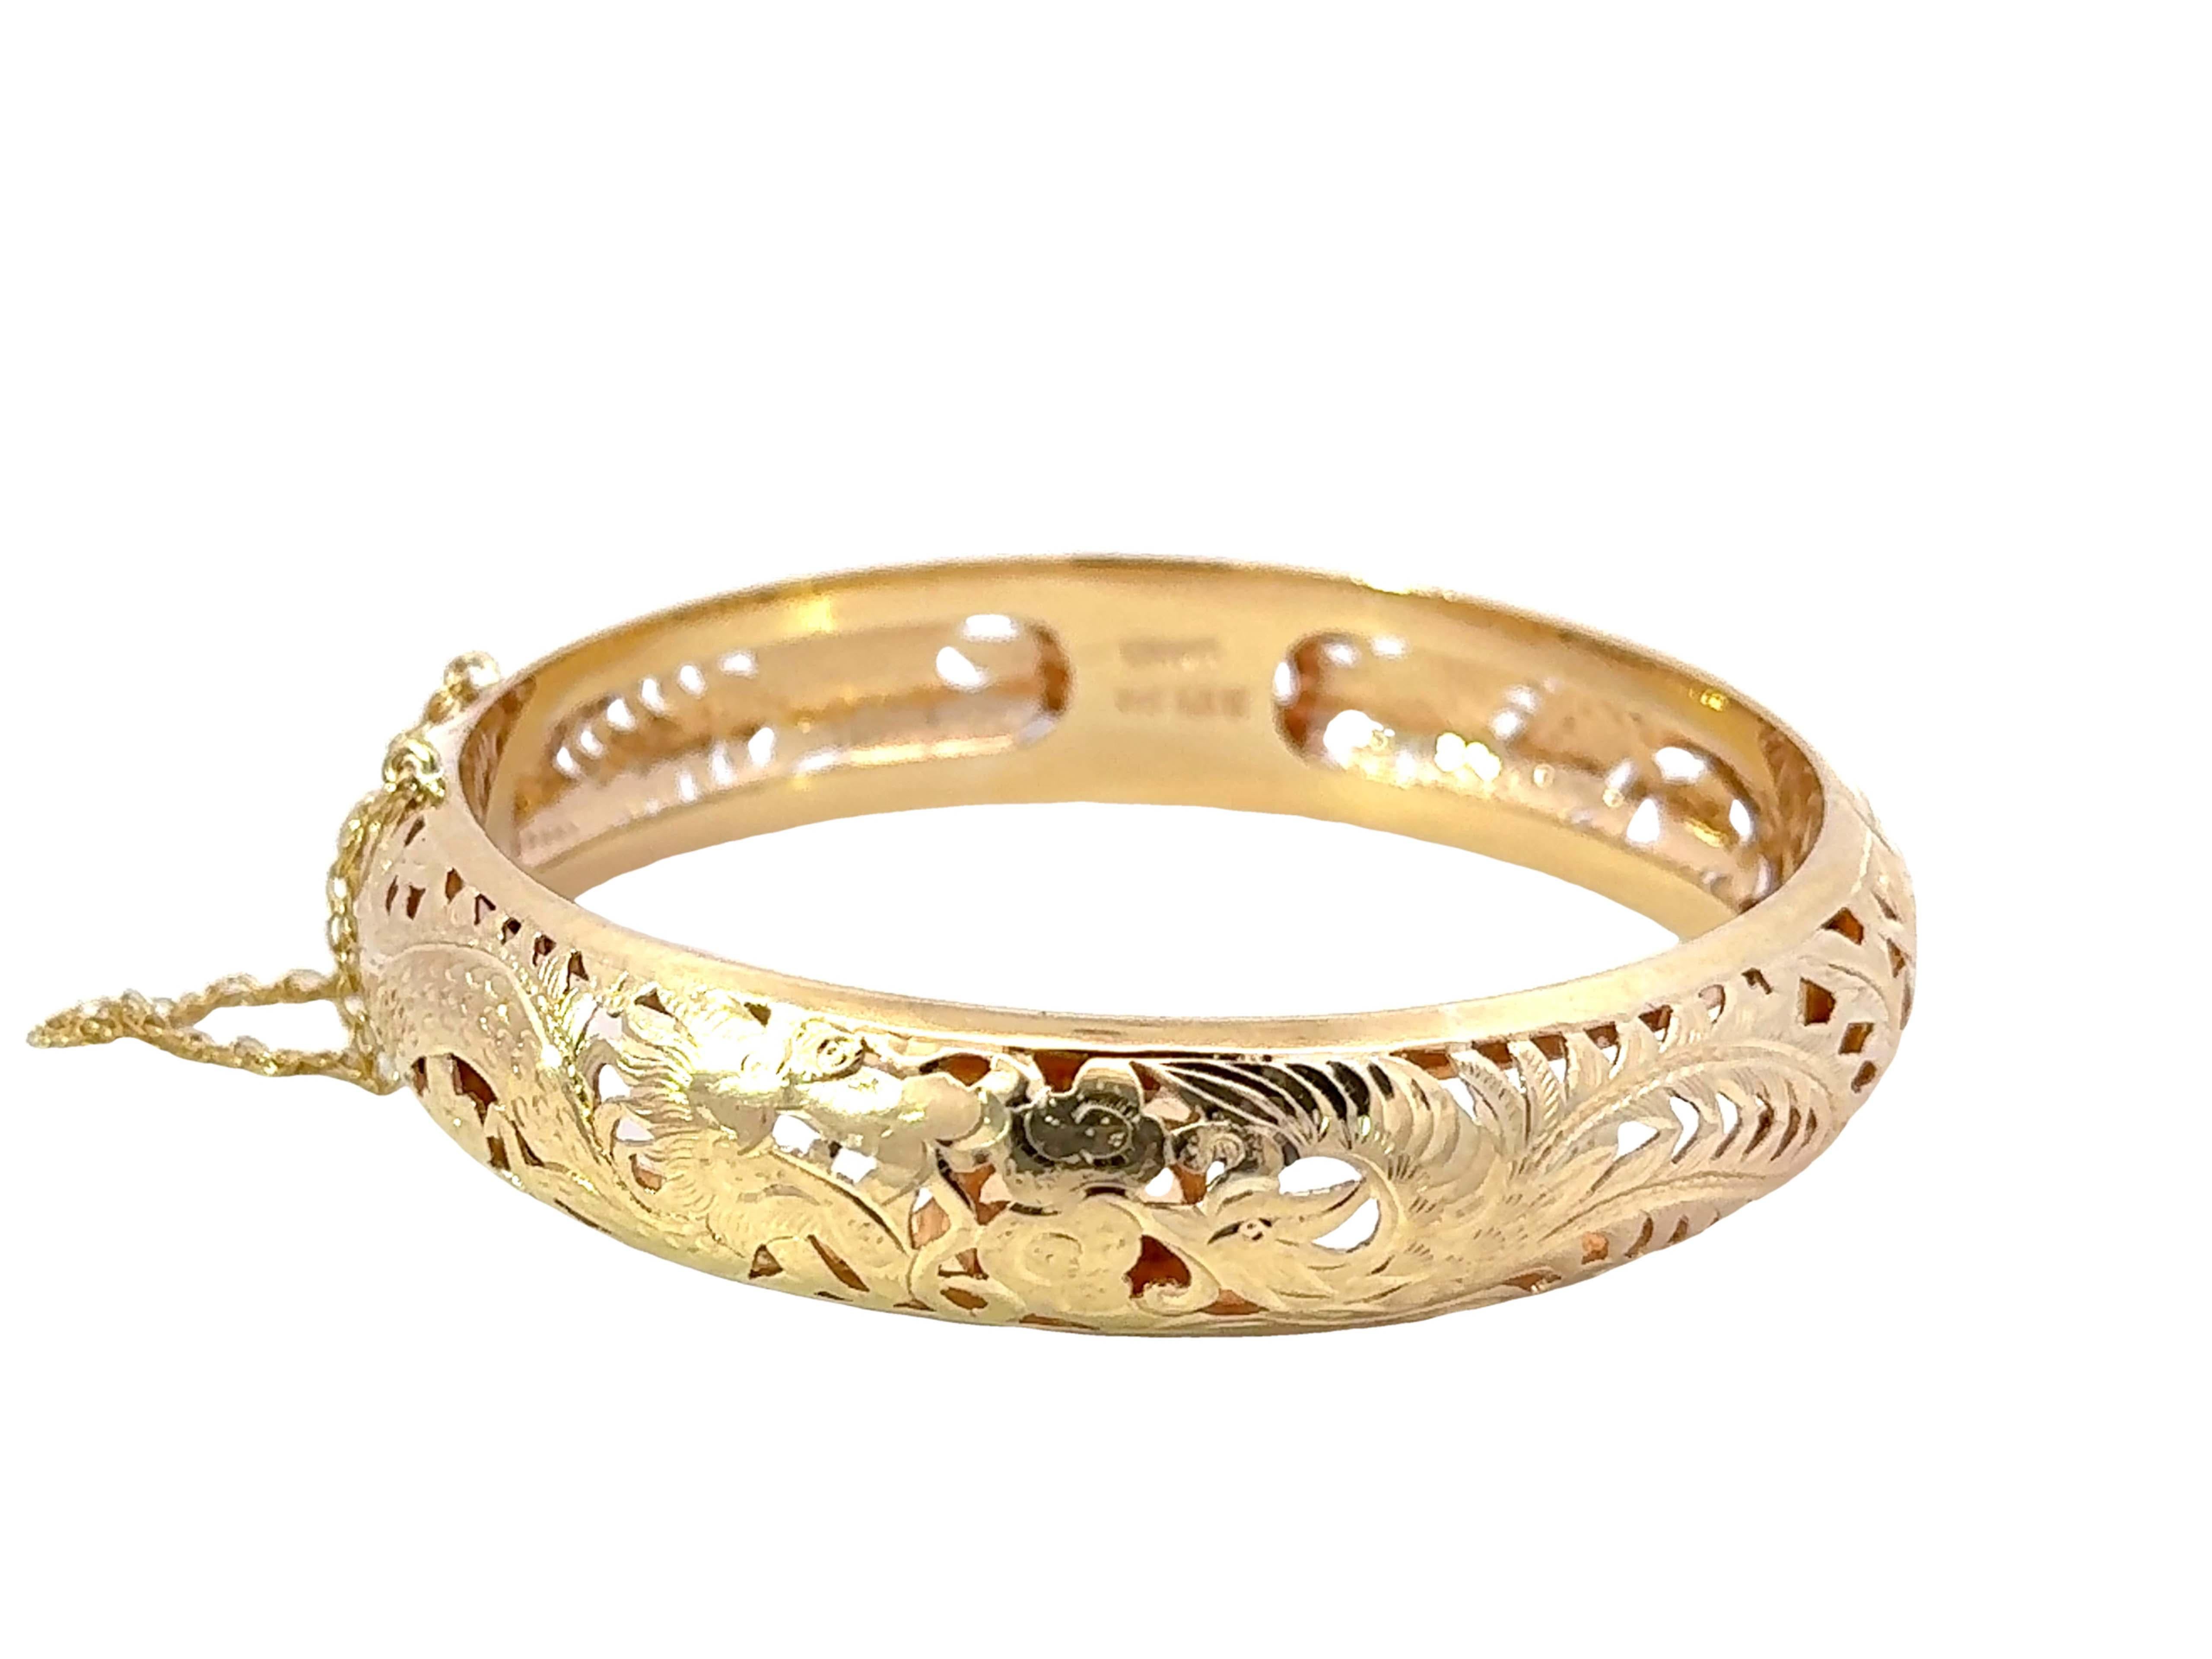 Specifications:

Designer: Ming's

Metal: 14k Yellow Gold

Total Weight: 59.1 Grams

Bracelet Circumference: ~7.0